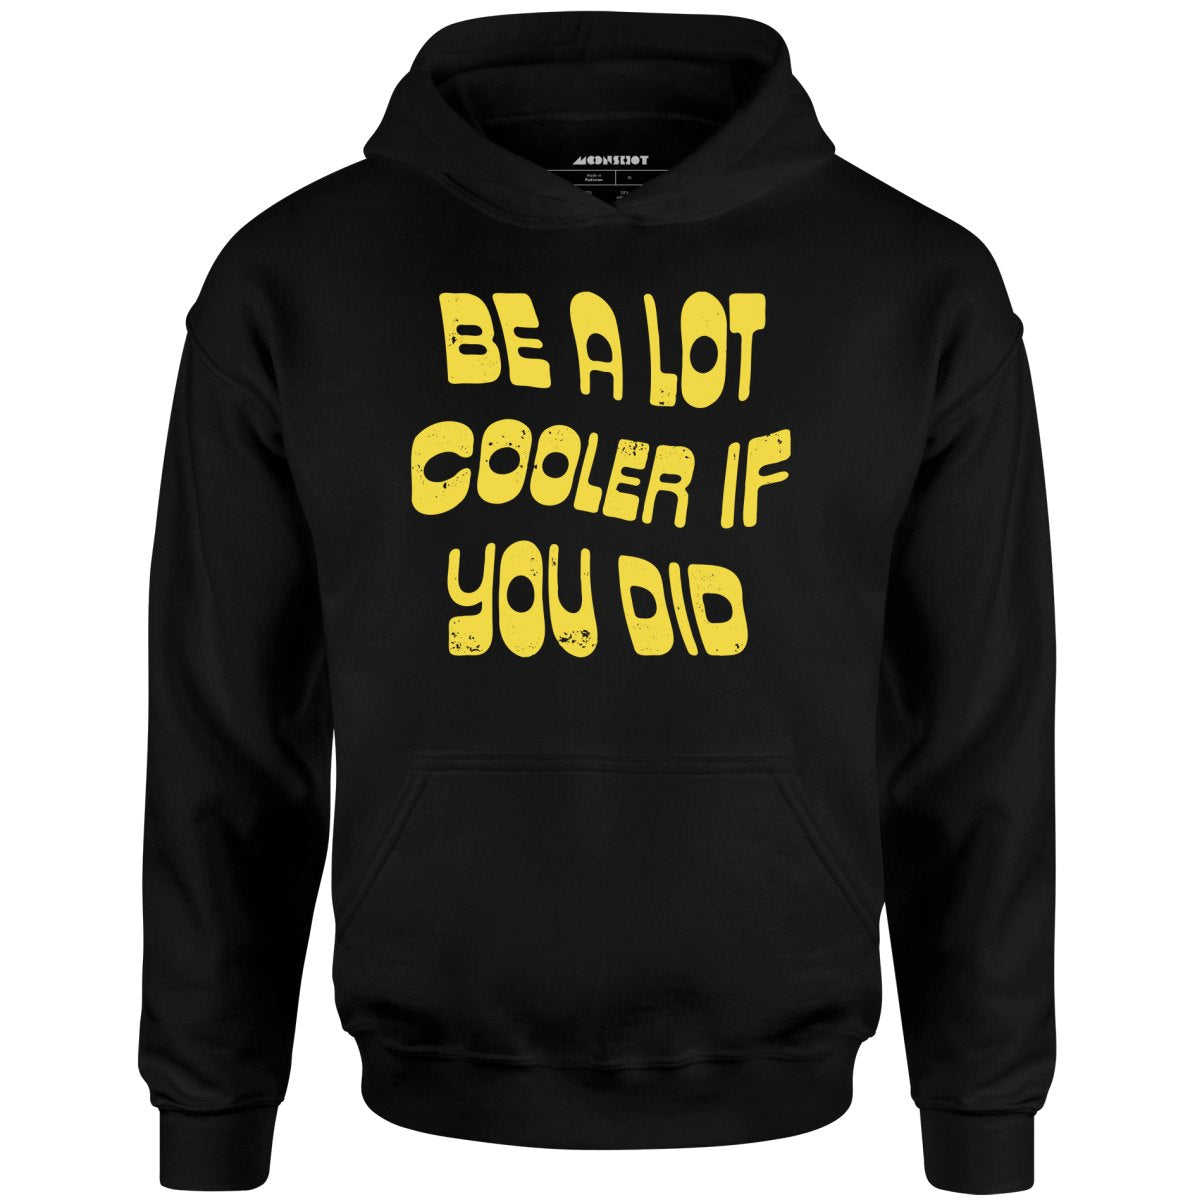 Be a Lot Cooler if You Did - Unisex Hoodie